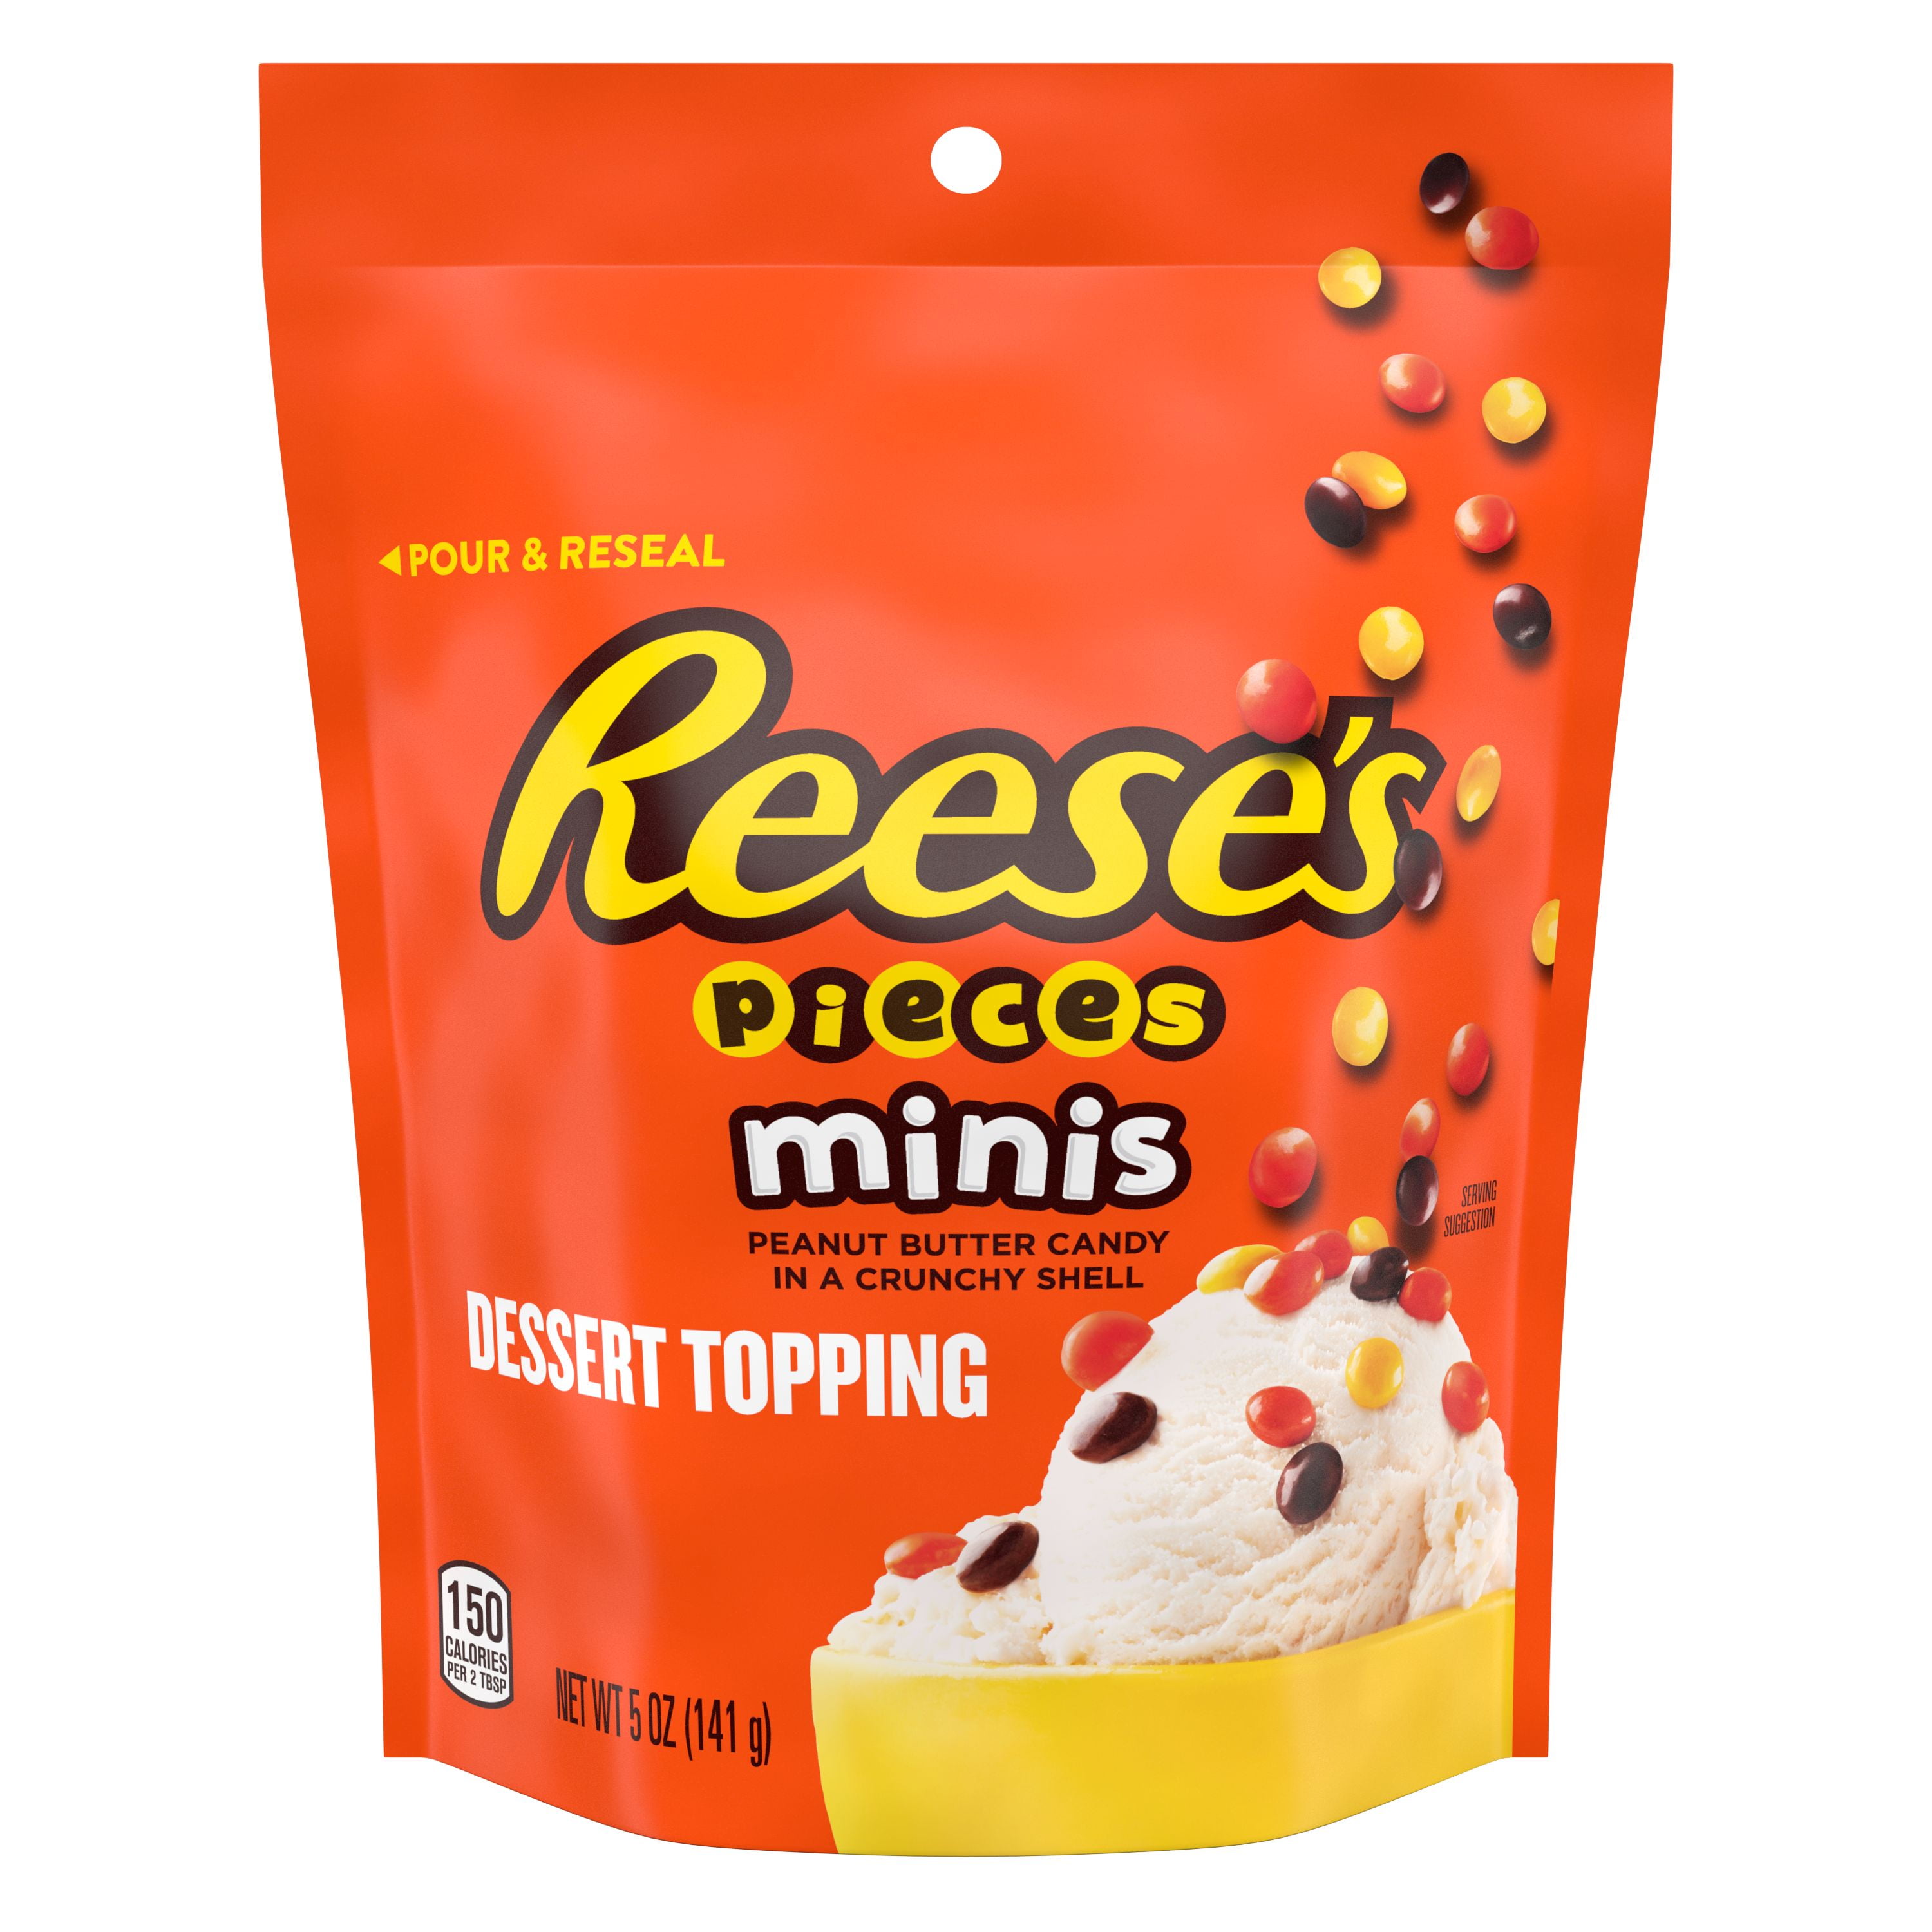 REESE'S PIECES Mini Peanut Butter Candy, Gluten Free, 5 Oz, Resealable Bag